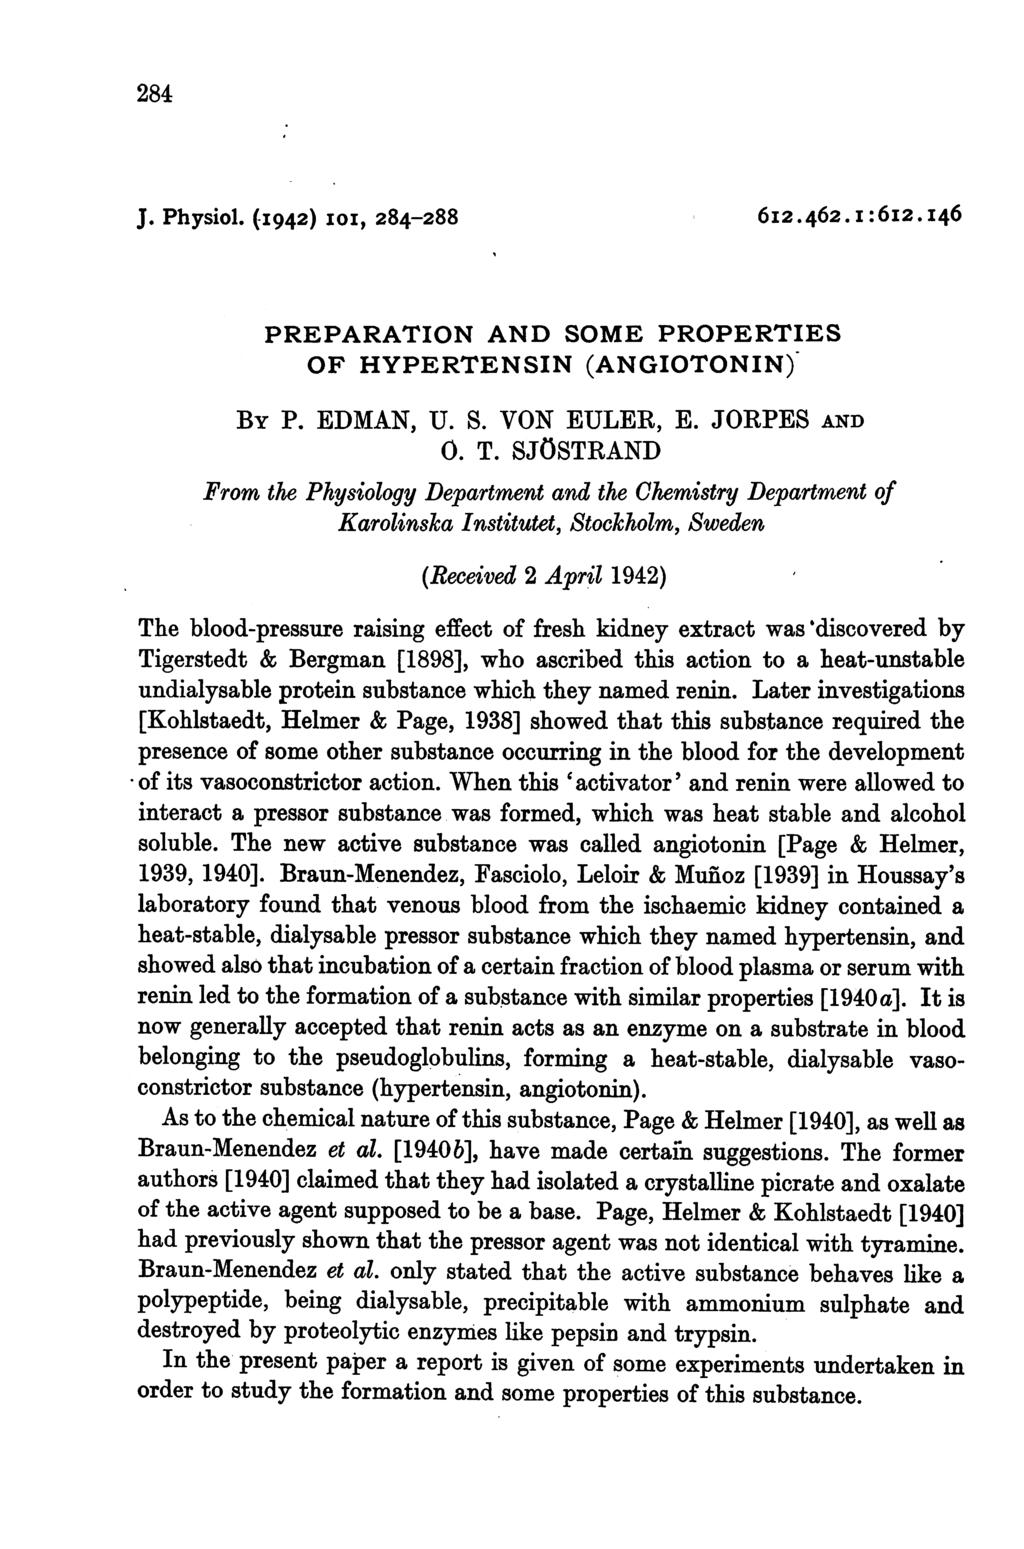 284 J. Physiol. (I942) IOI, 284-288 6I2.462.1:6I2.I46 PREPARATION AND SOME PROPERTIES OF HYPERTENSIN (ANGIOTONIN) BY P. EDMAN, U. S. VON EULER, E. JORPES AND 0. T.